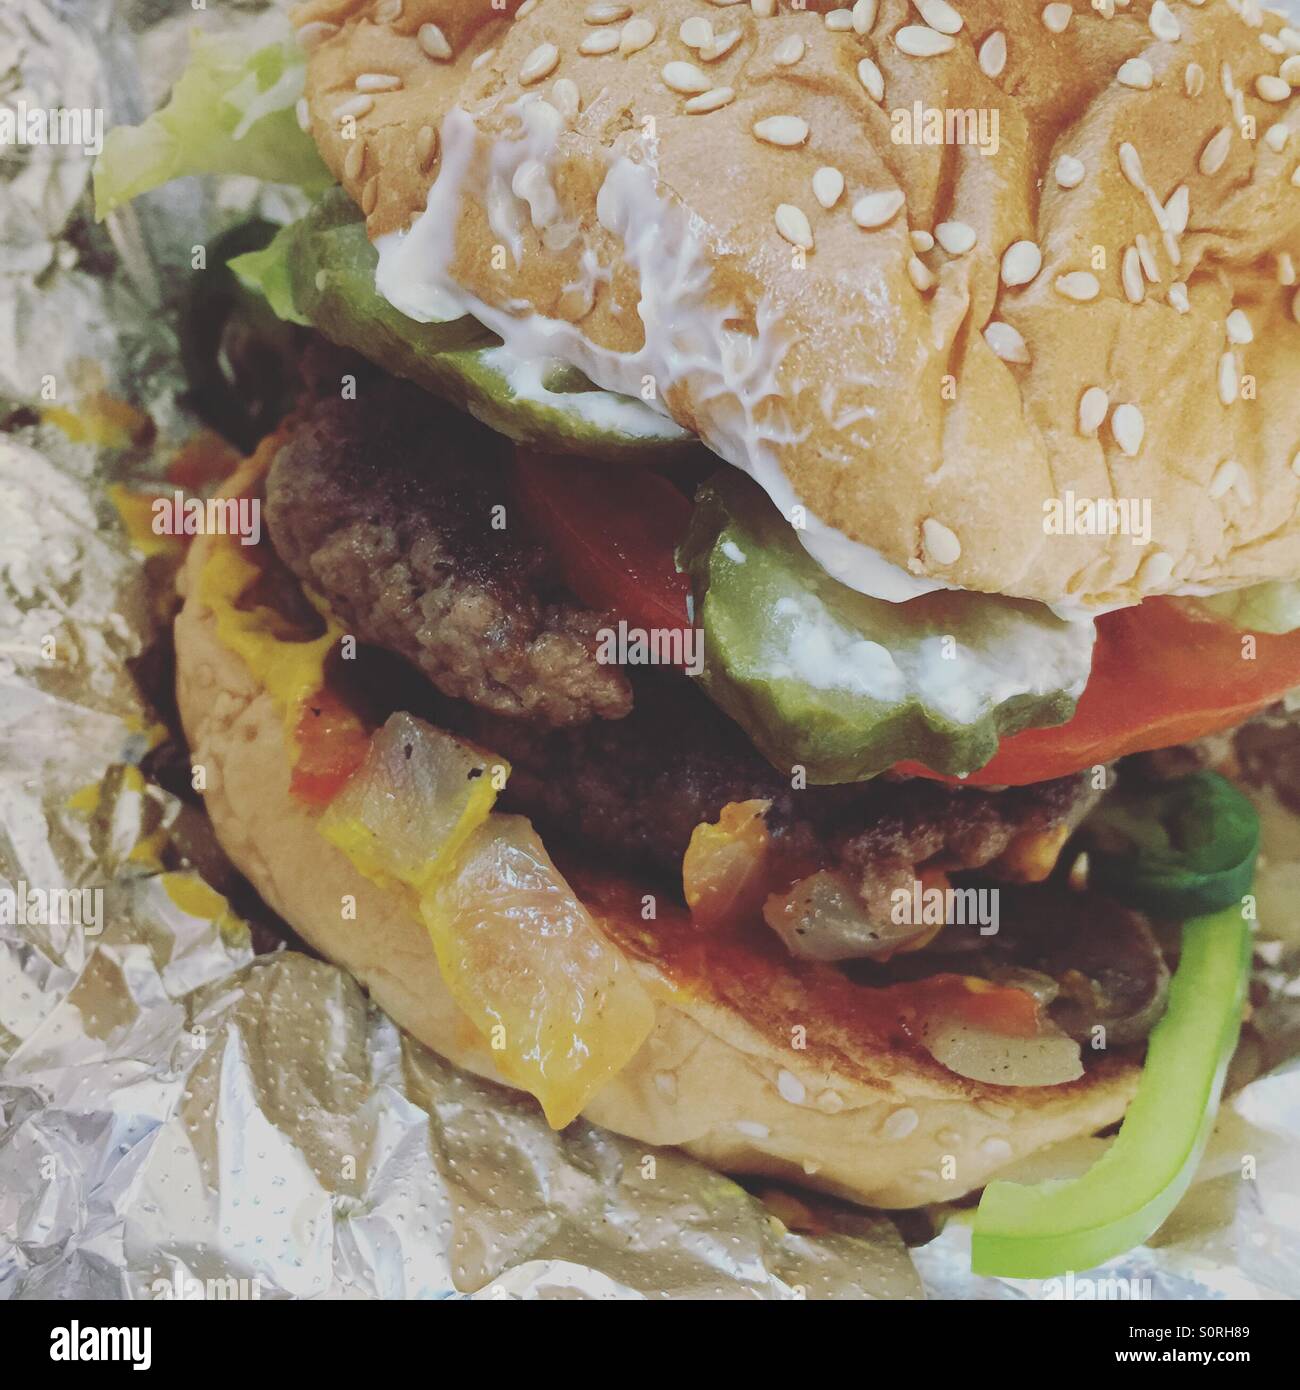 Juicy double burger from restaurant Stock Photo